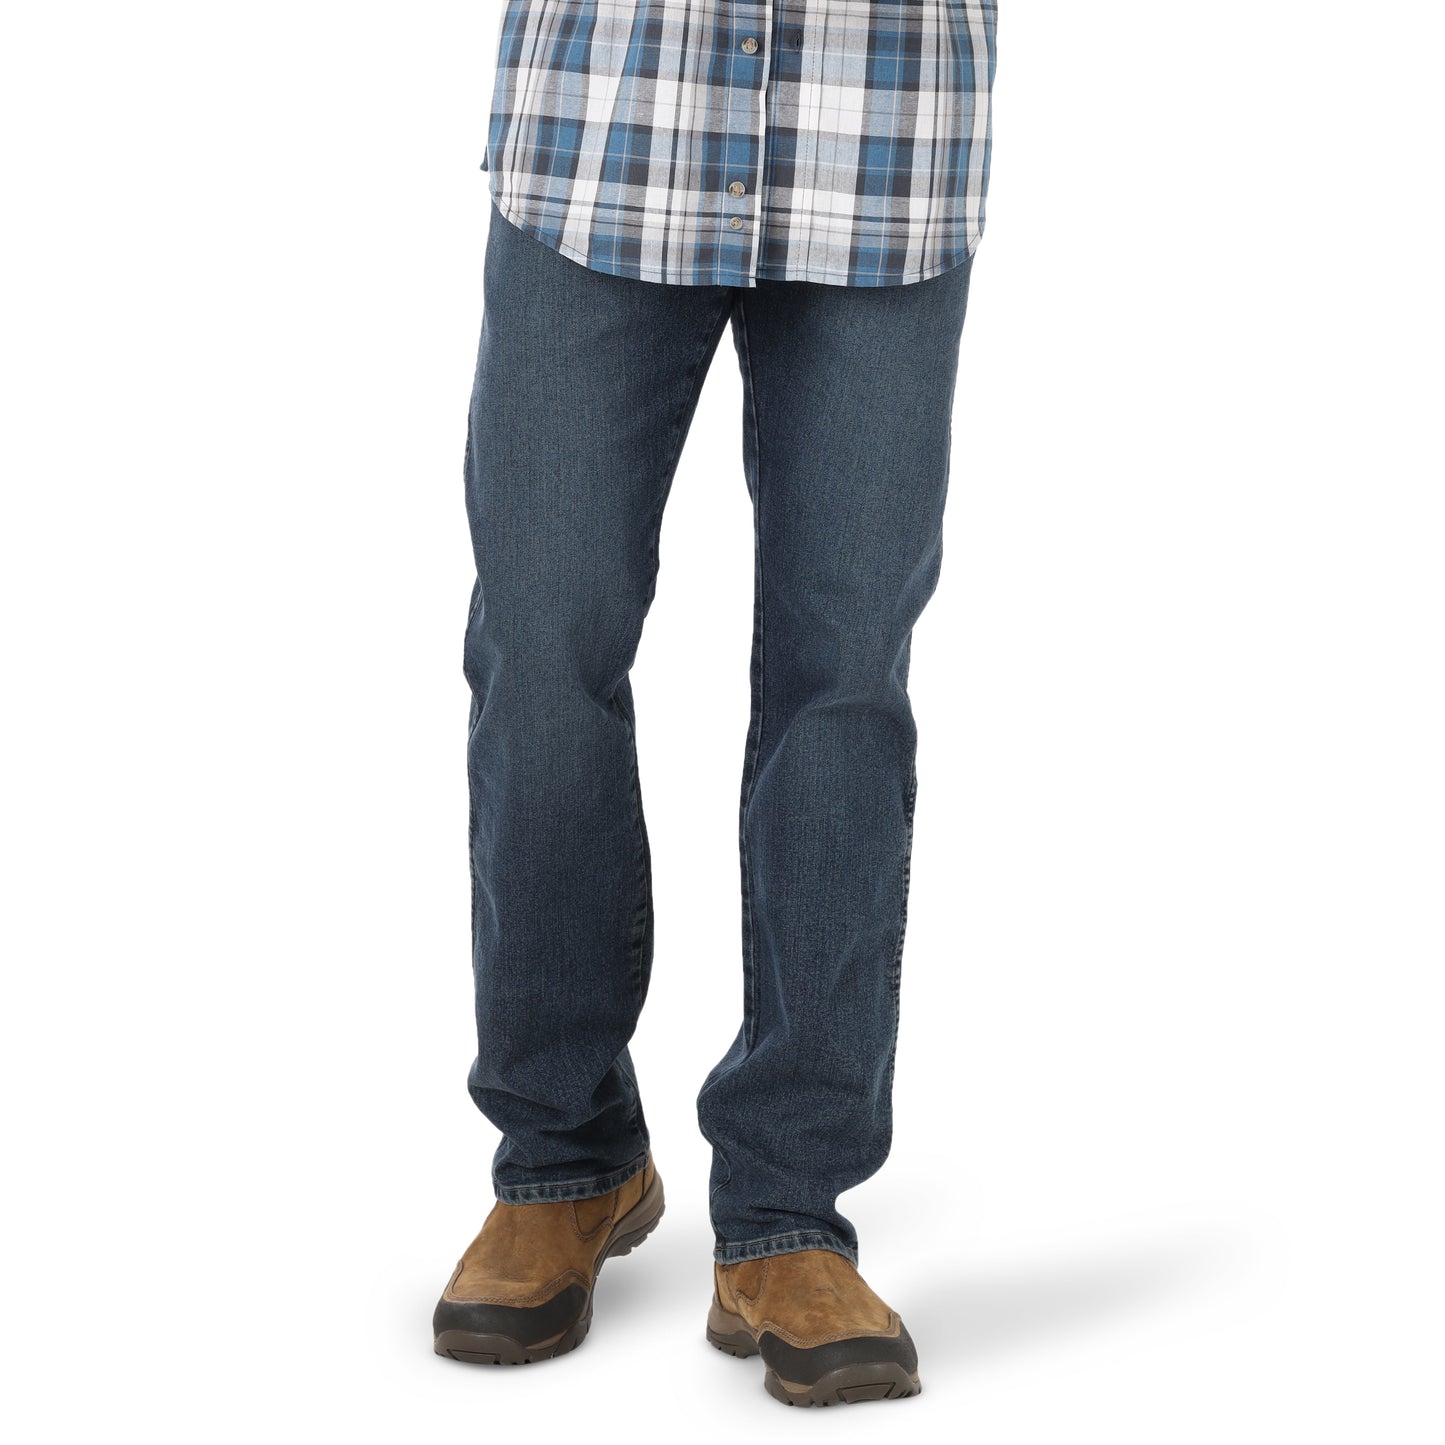 Rugged Wear Performance Series Regular Fit Jeans